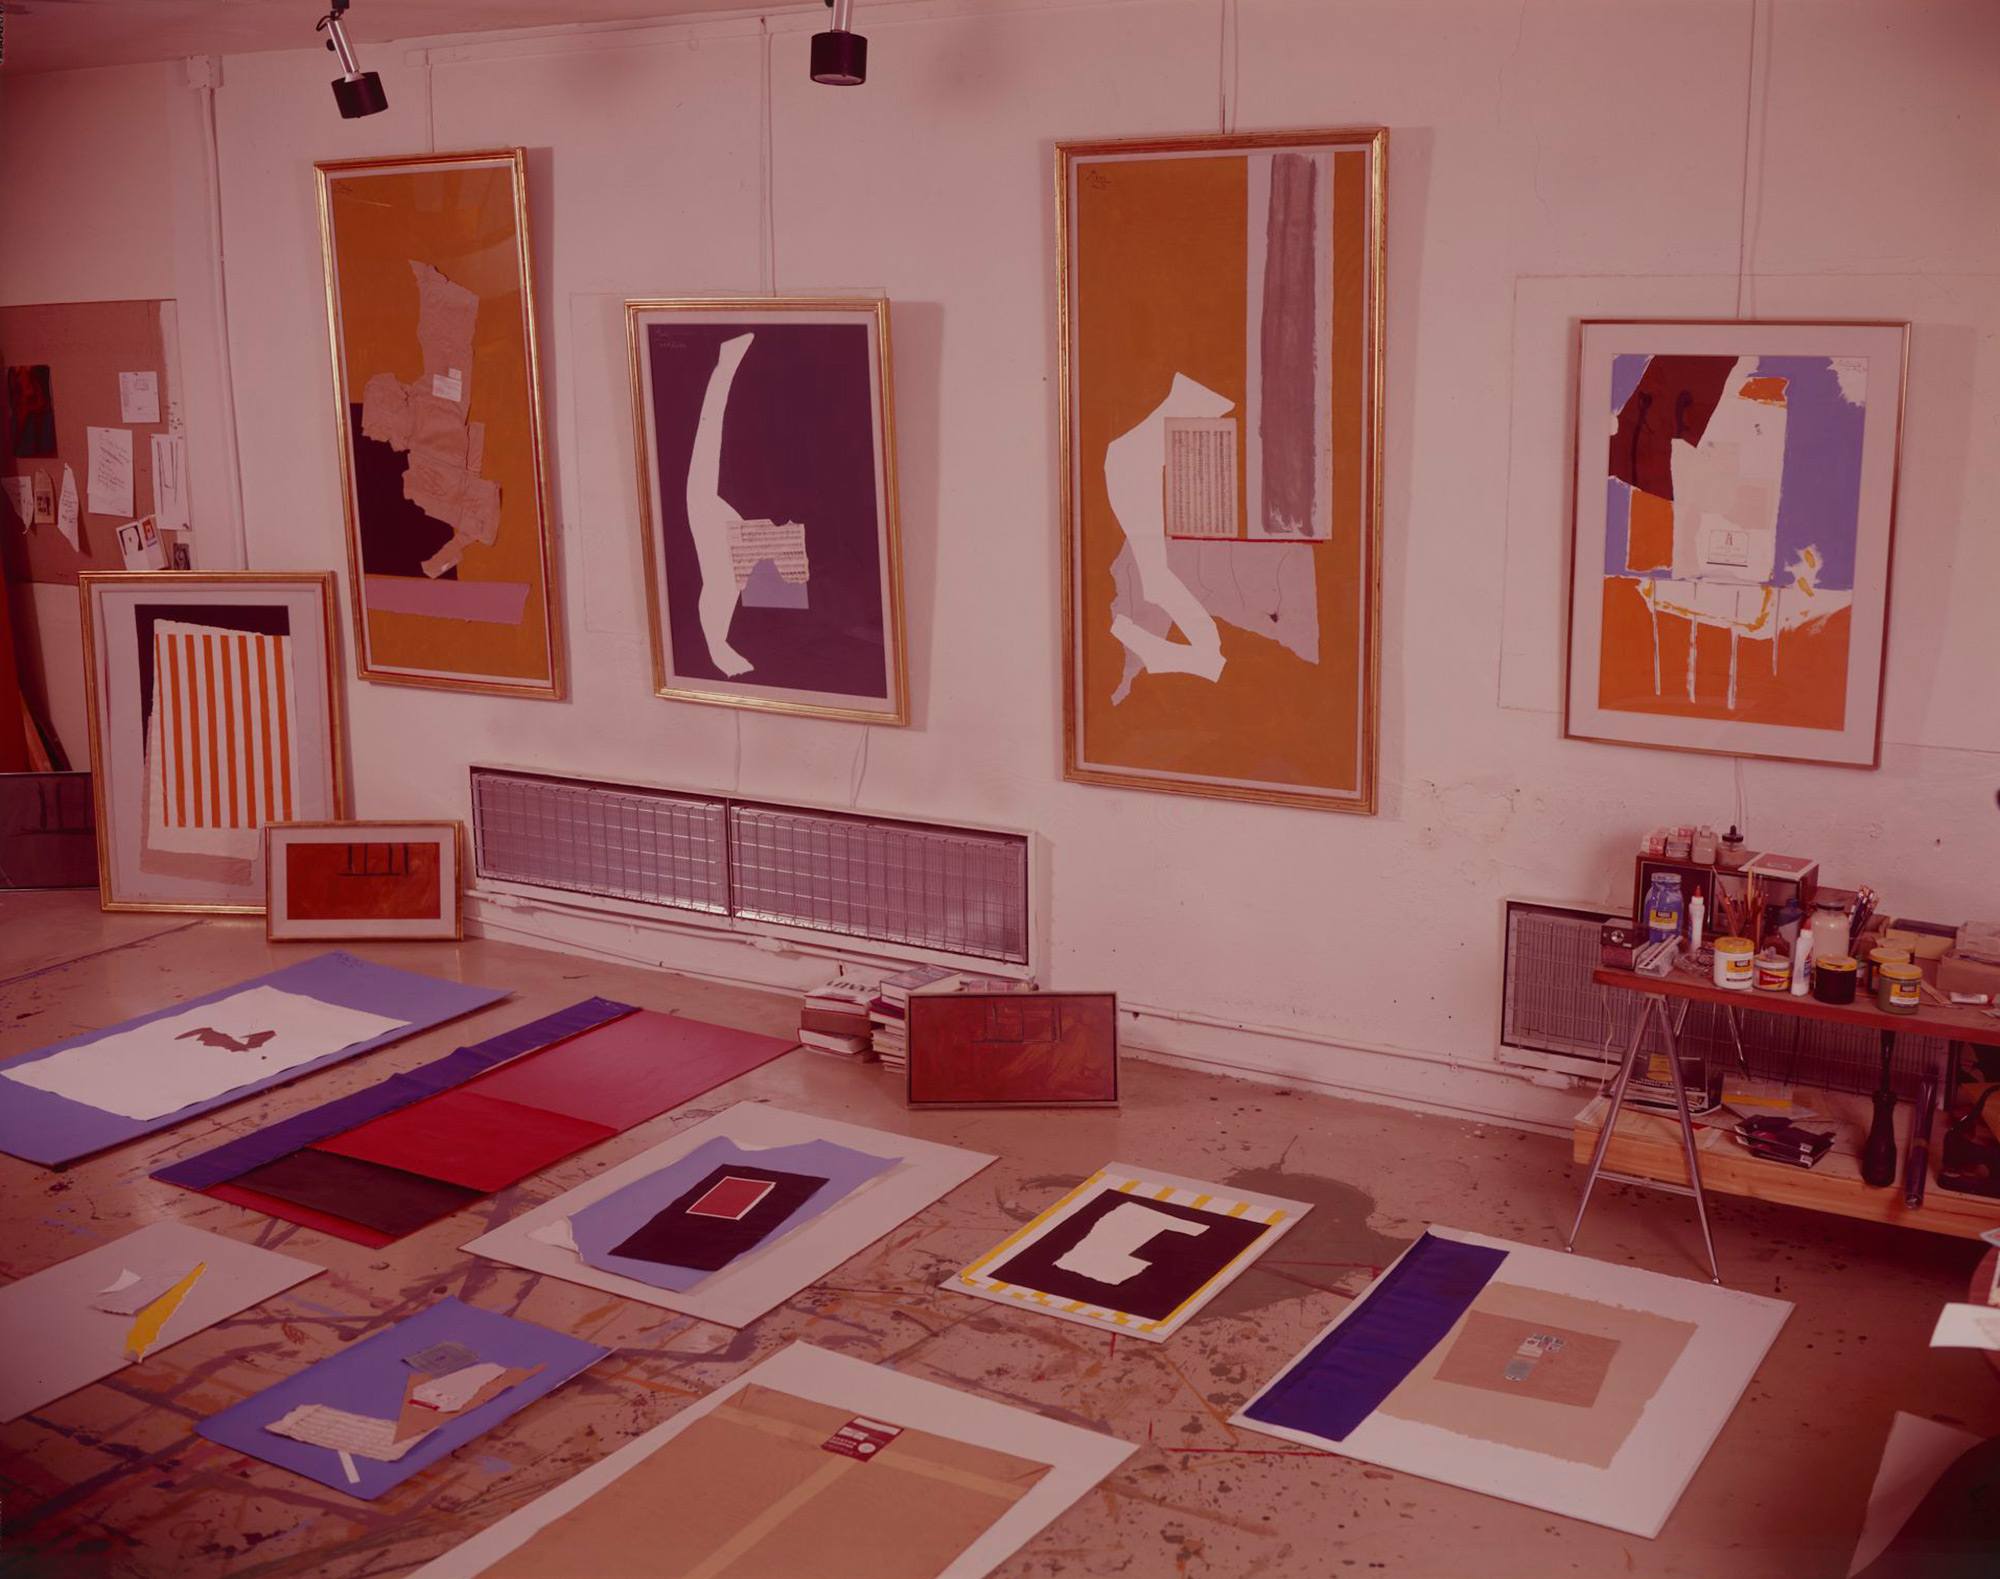 a group of collages on the floor and wall in Motherwell's studio